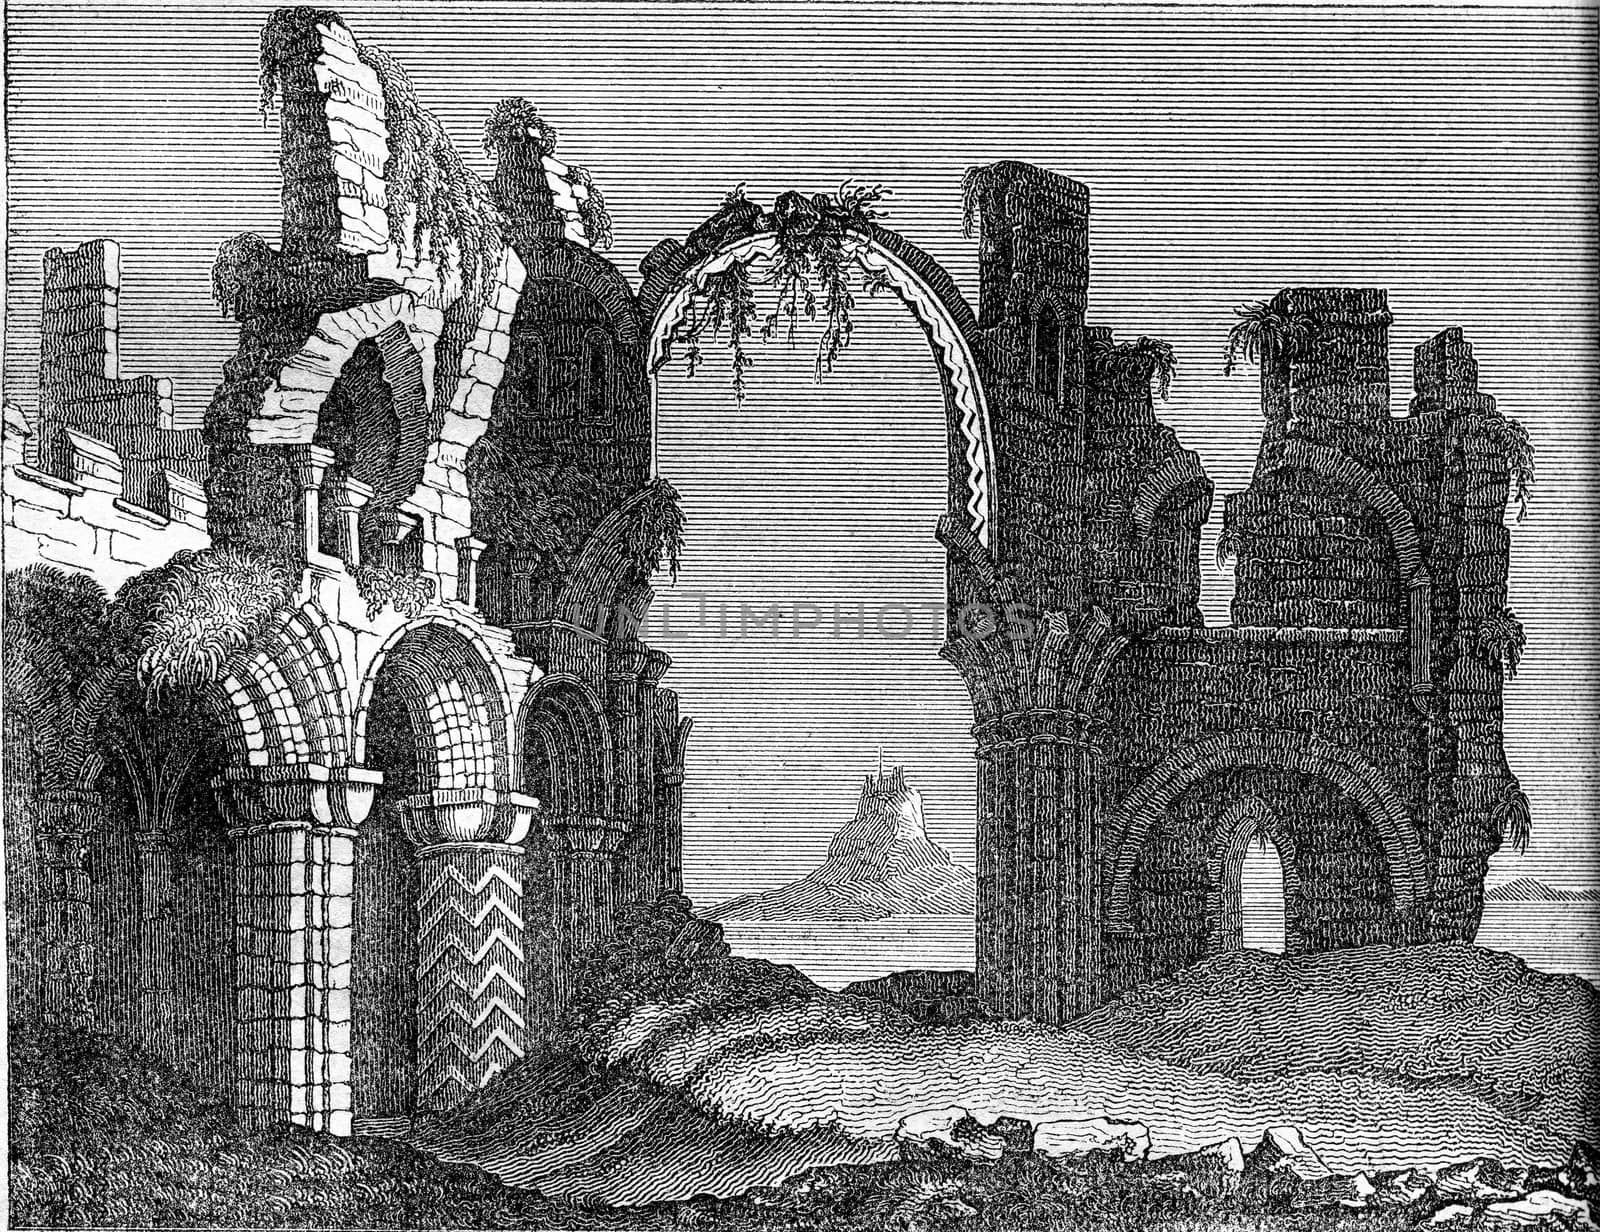 Ruins of the monastery of Lindisfarne, Holy Island, vintage engraved illustration. Colorful History of England, 1837.
